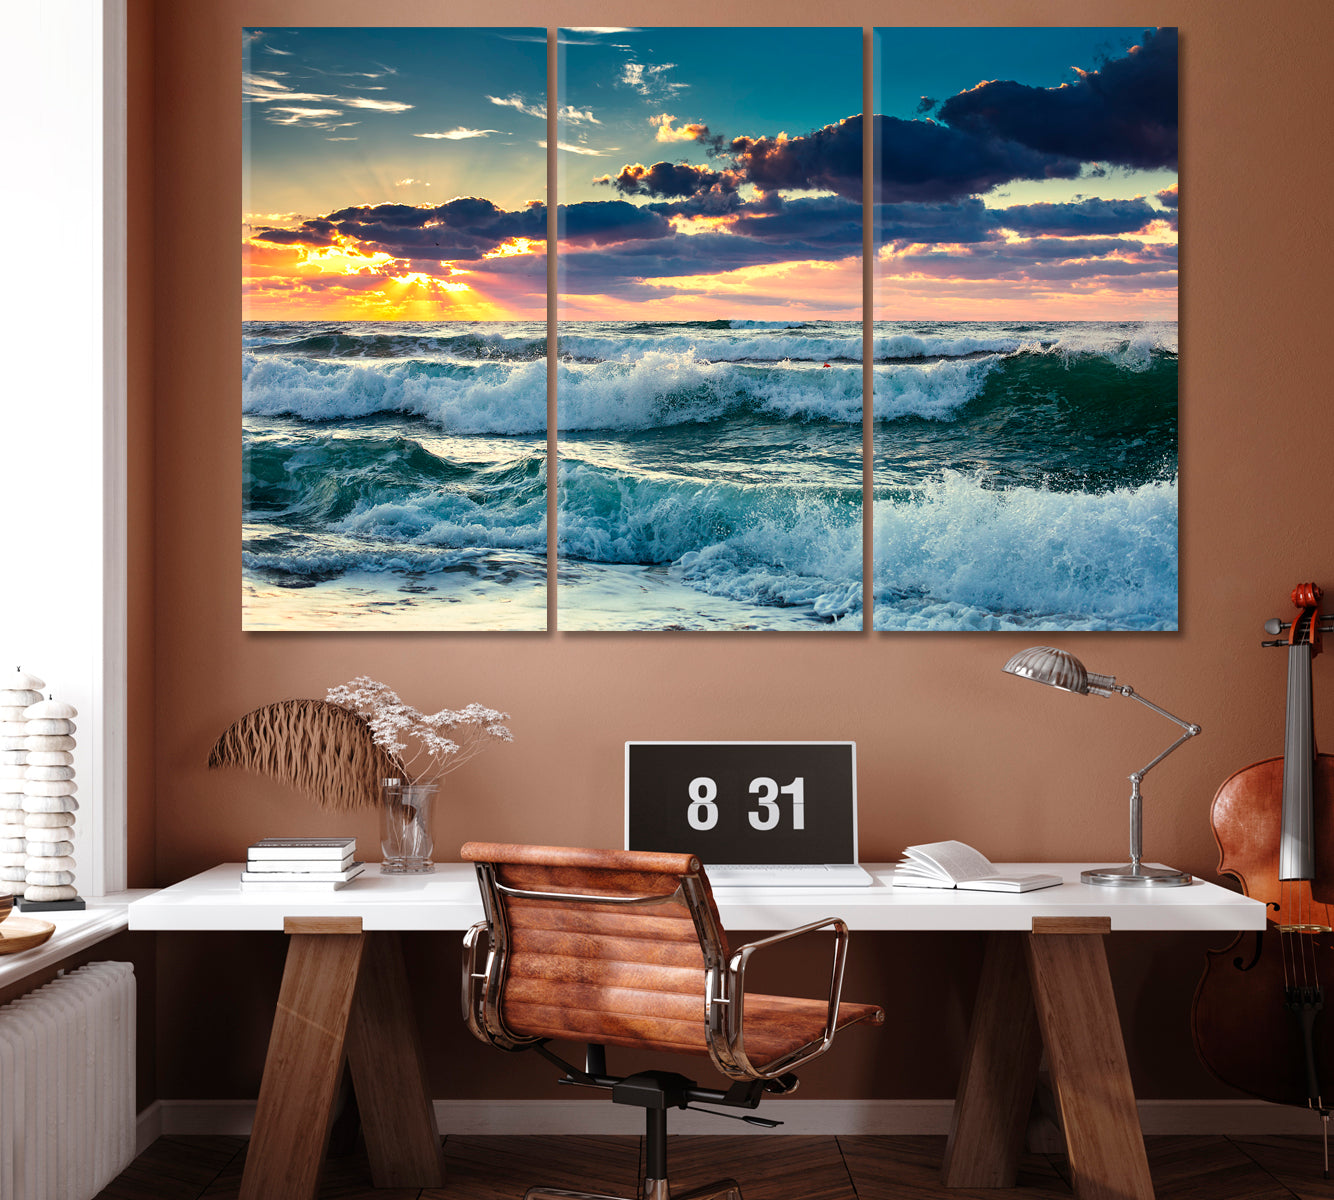 Ocean Waves Landscape with Dramatic Clouds Canvas Print ArtLexy 3 Panels 36"x24" inches 